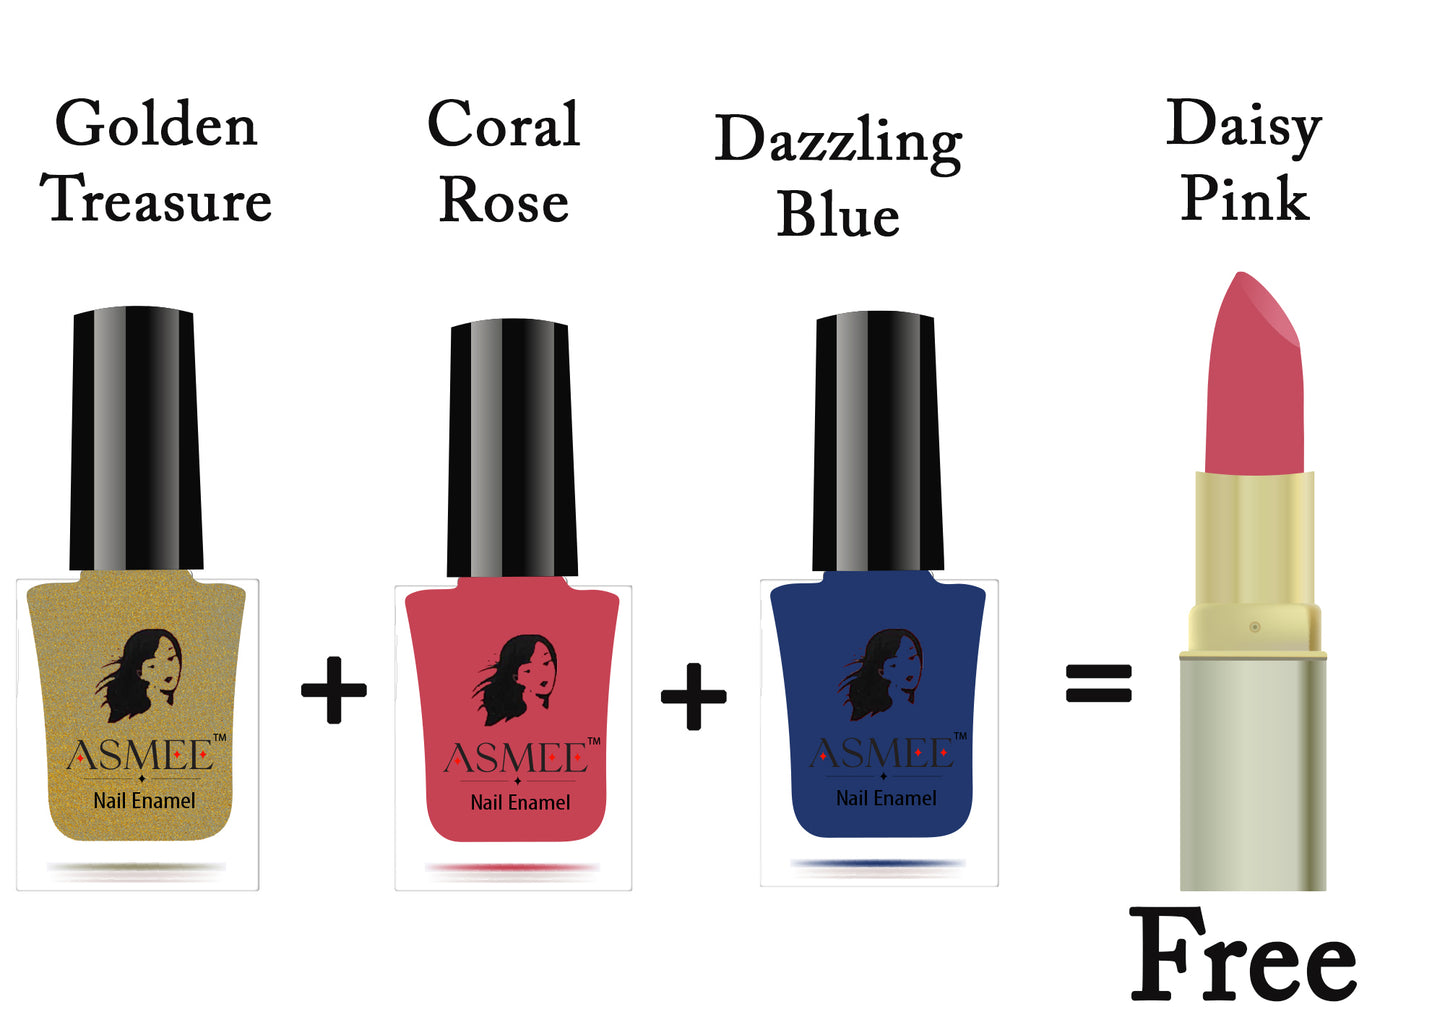 Buy  3 Classic Nail Polish ( Golden  Treasure, Coral Rose,  Dazzling Blue)  & Get 1 Glossy Lipstick ( Daisy Pink ) Free